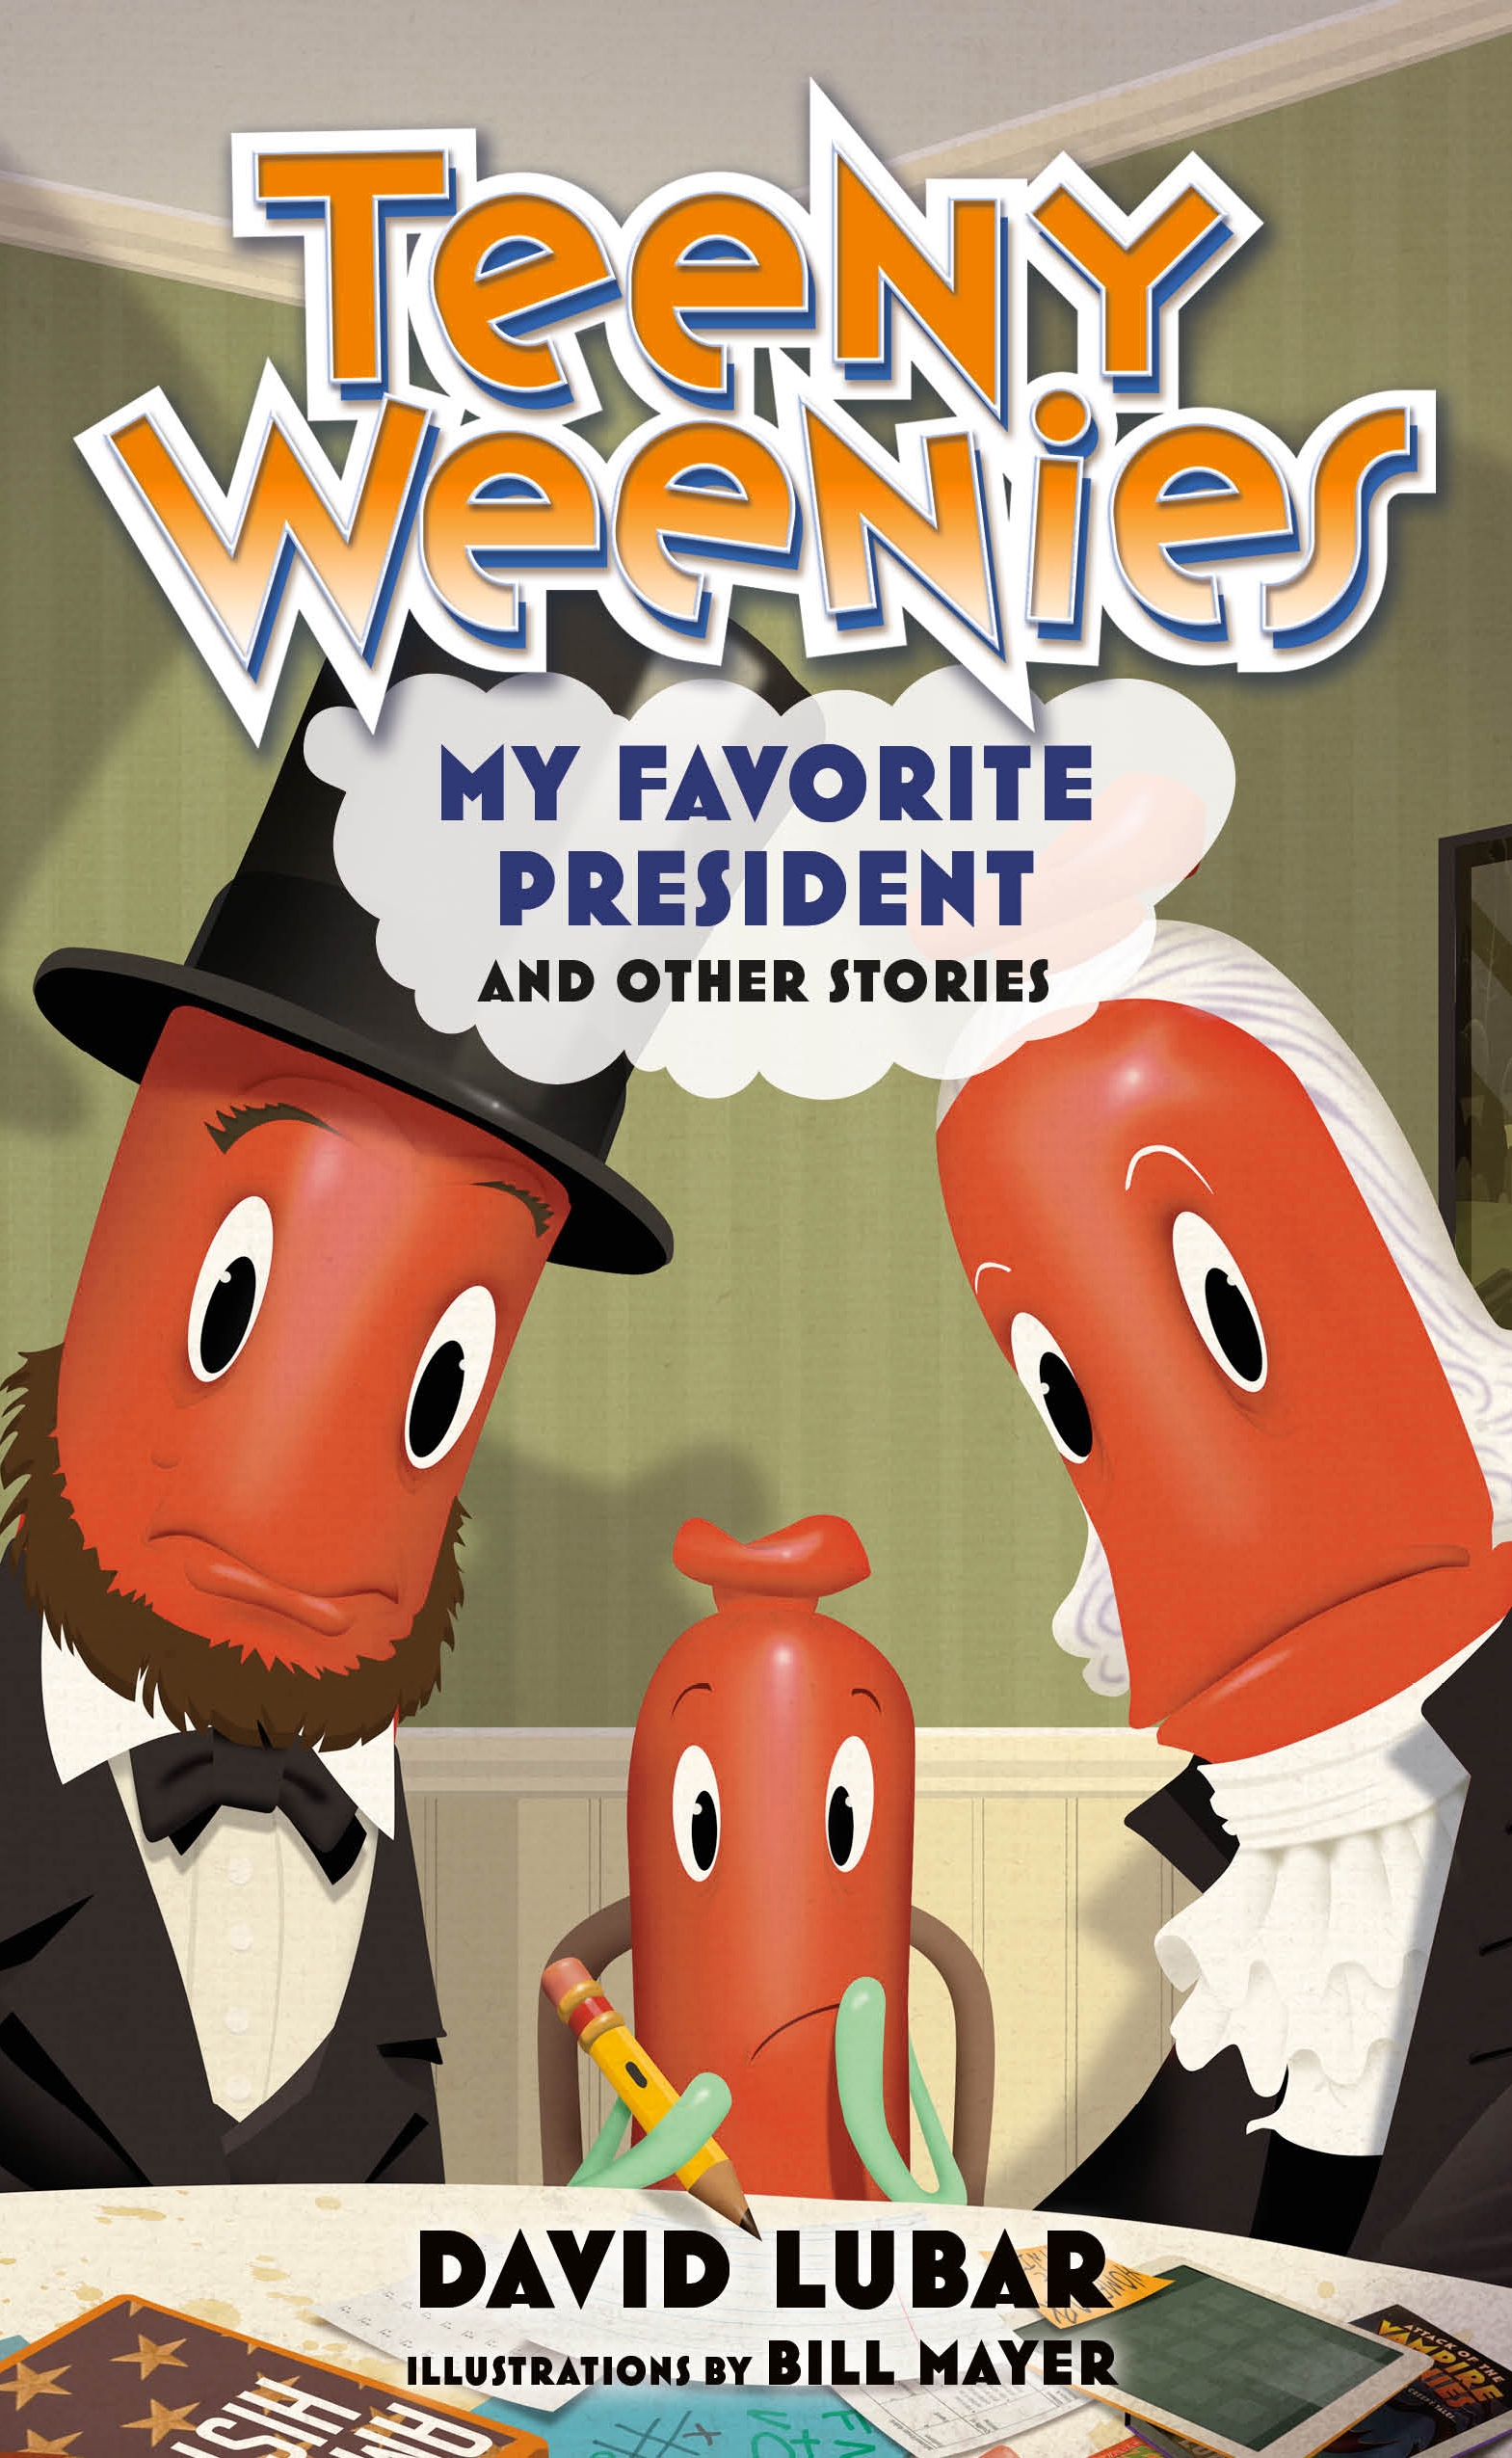 Teeny Weenies: My Favorite President : And Other Stories by David Lubar